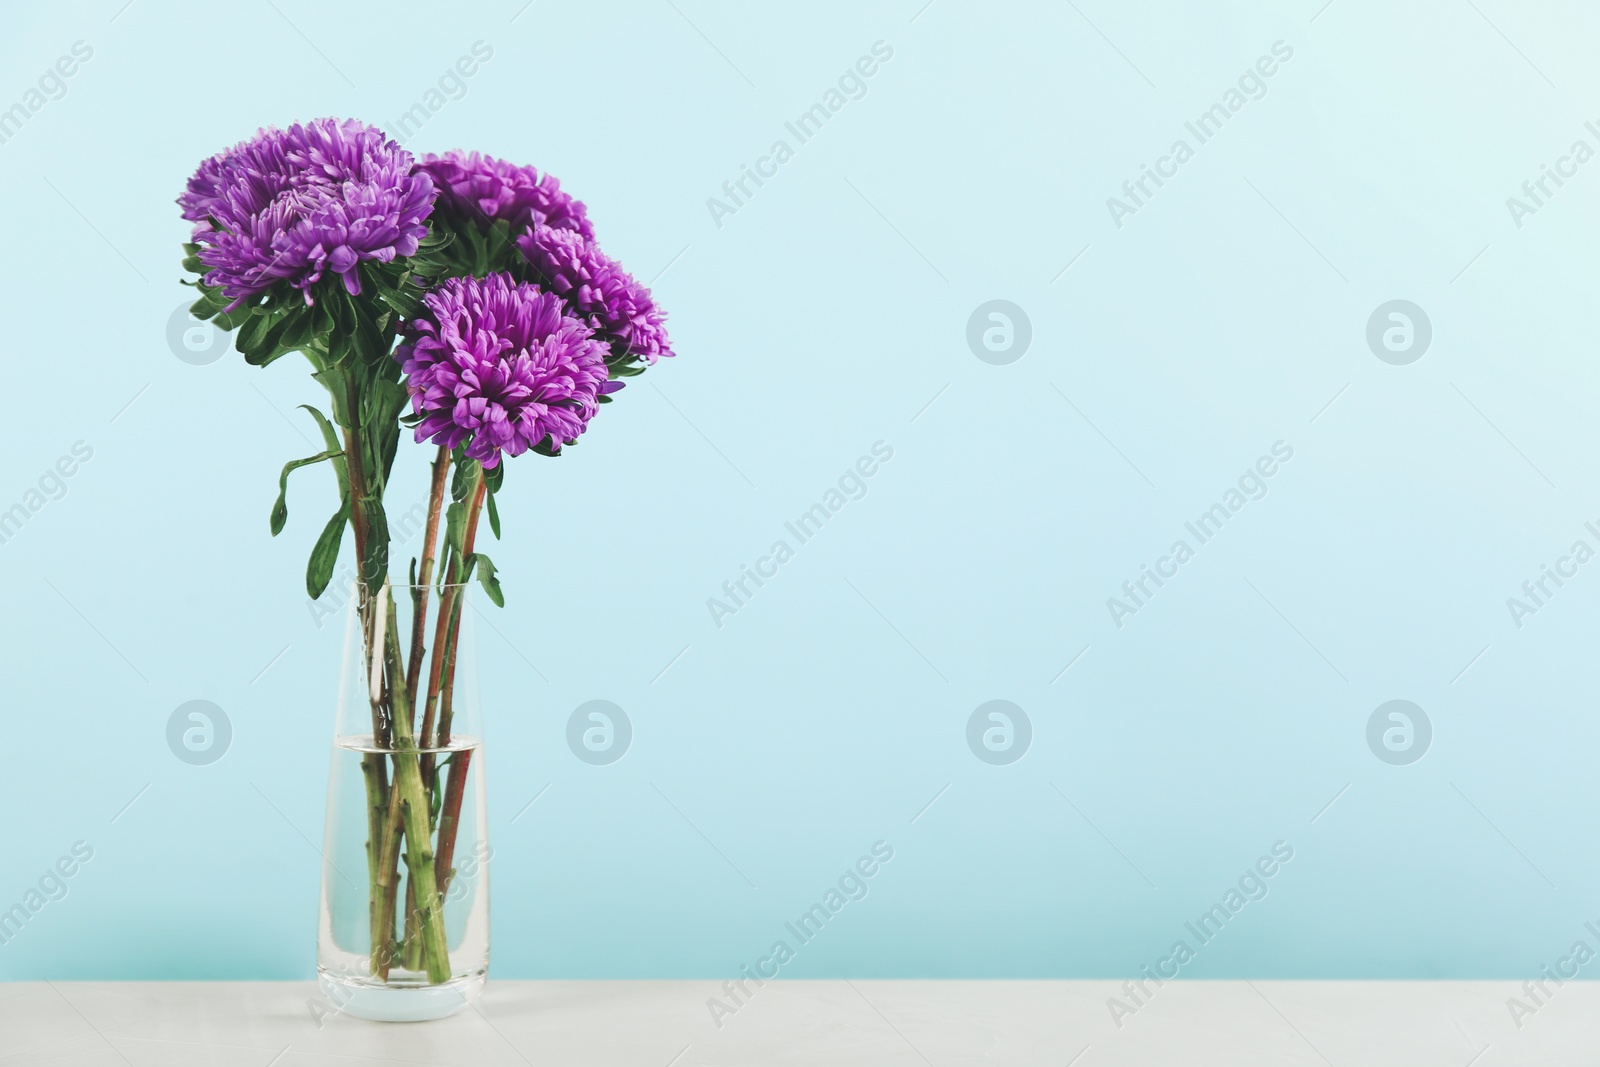 Photo of Beautiful asters in vase on table against light blue background, space for text. Autumn flowers